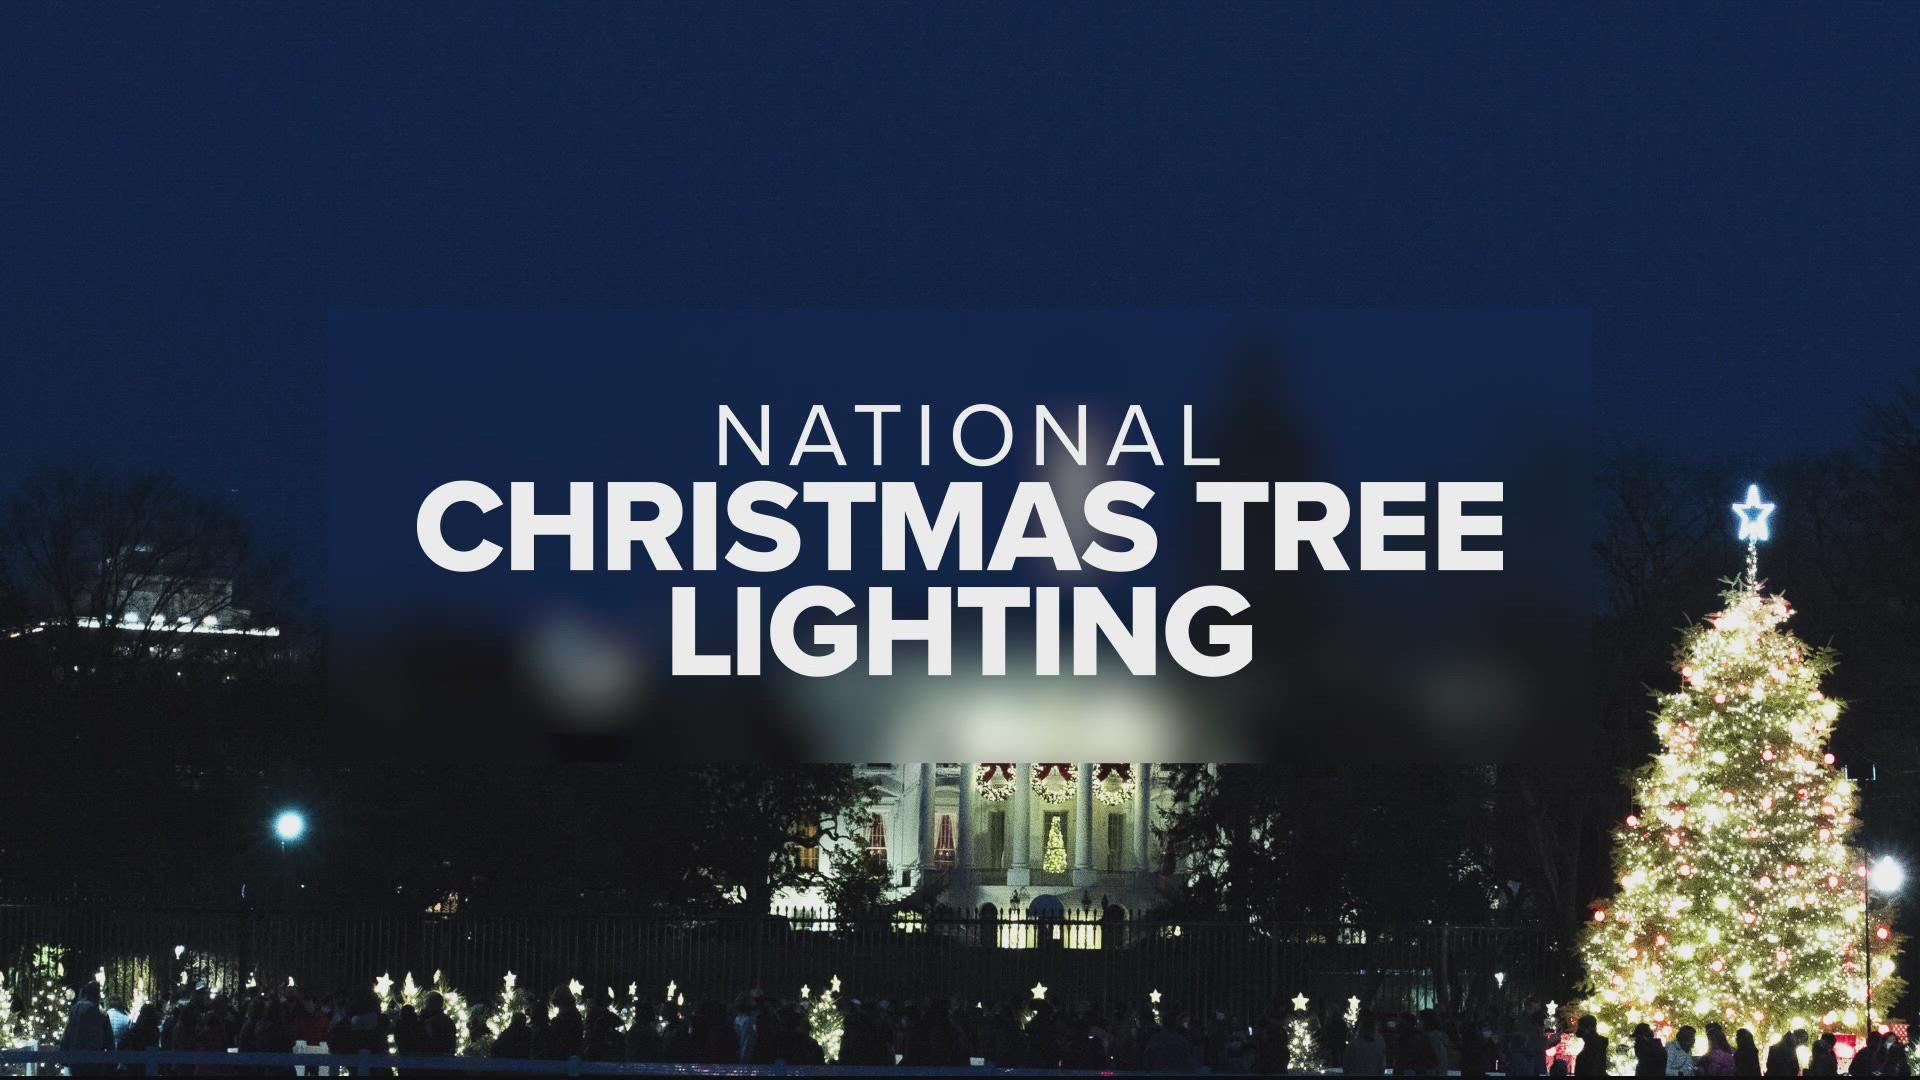 President Joe Biden and first lady Dr. Jill will light the tree tonight in about 30 minutes -- marking the ceremony's 100th anniversary.